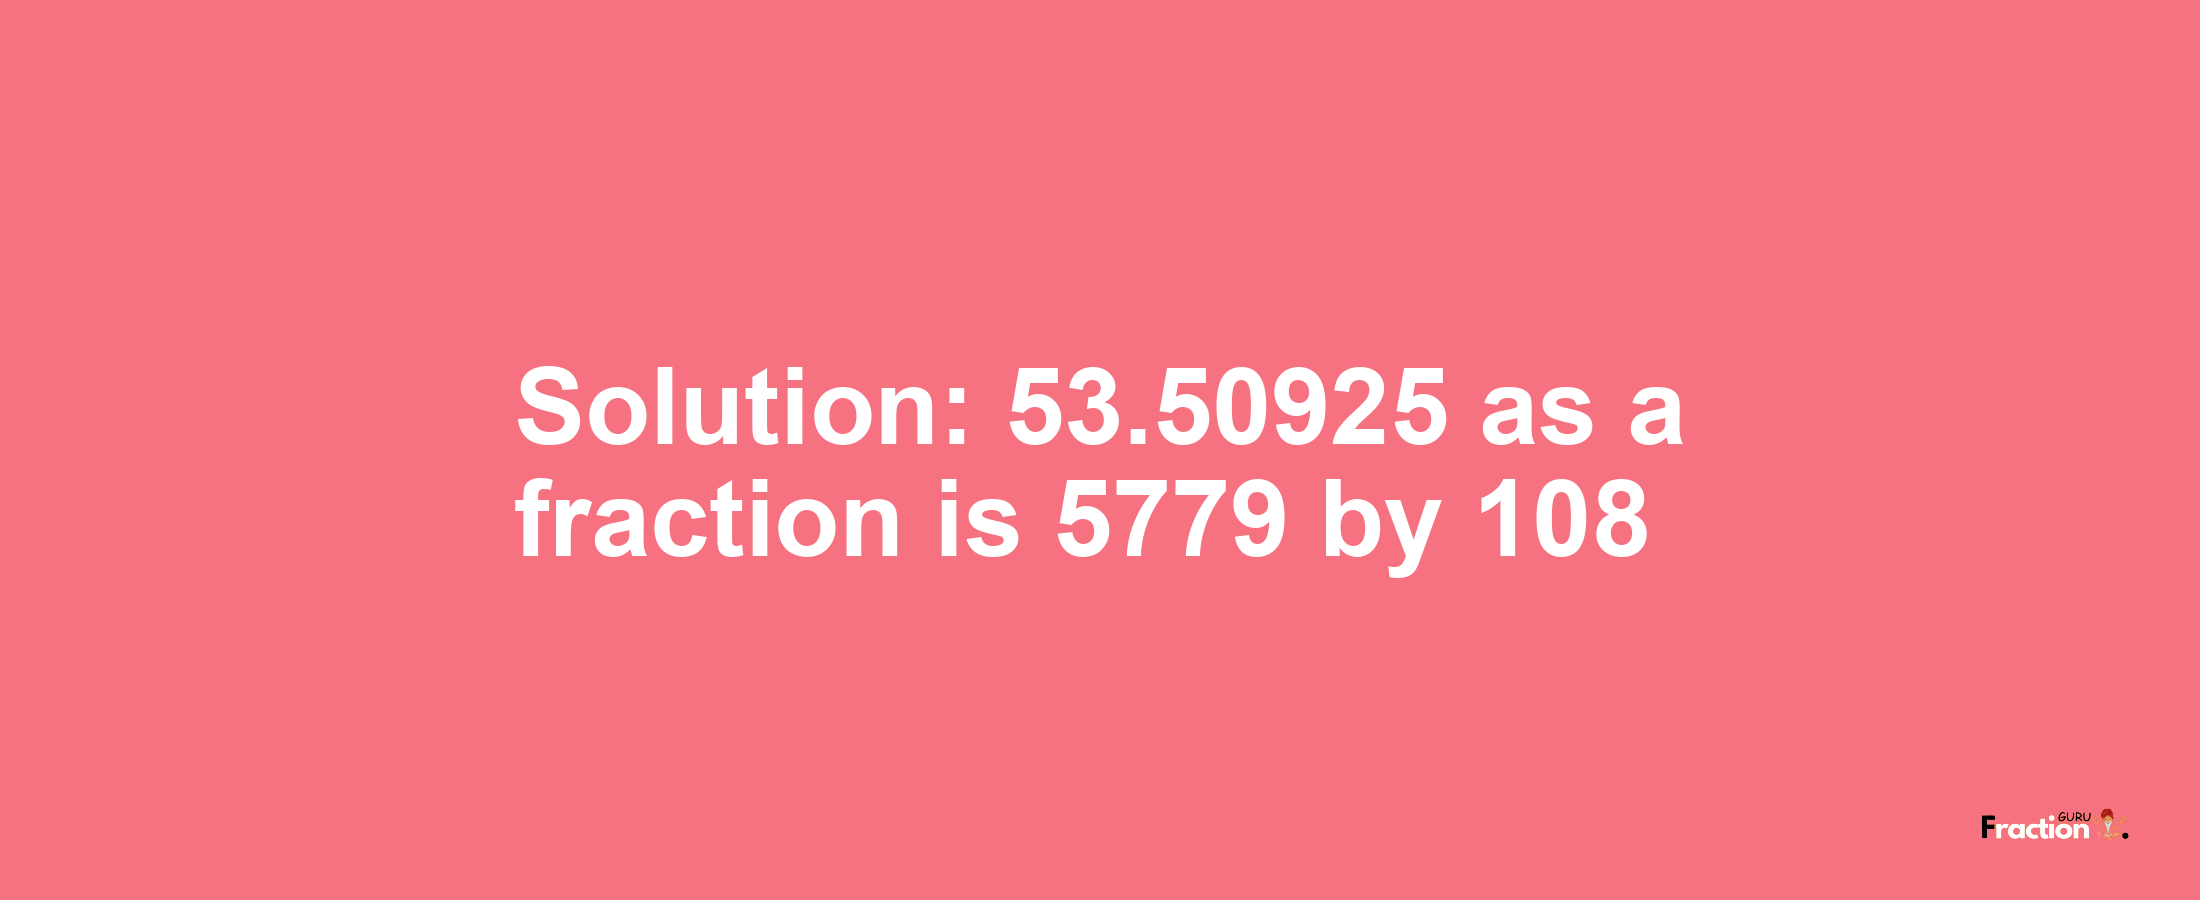 Solution:53.50925 as a fraction is 5779/108